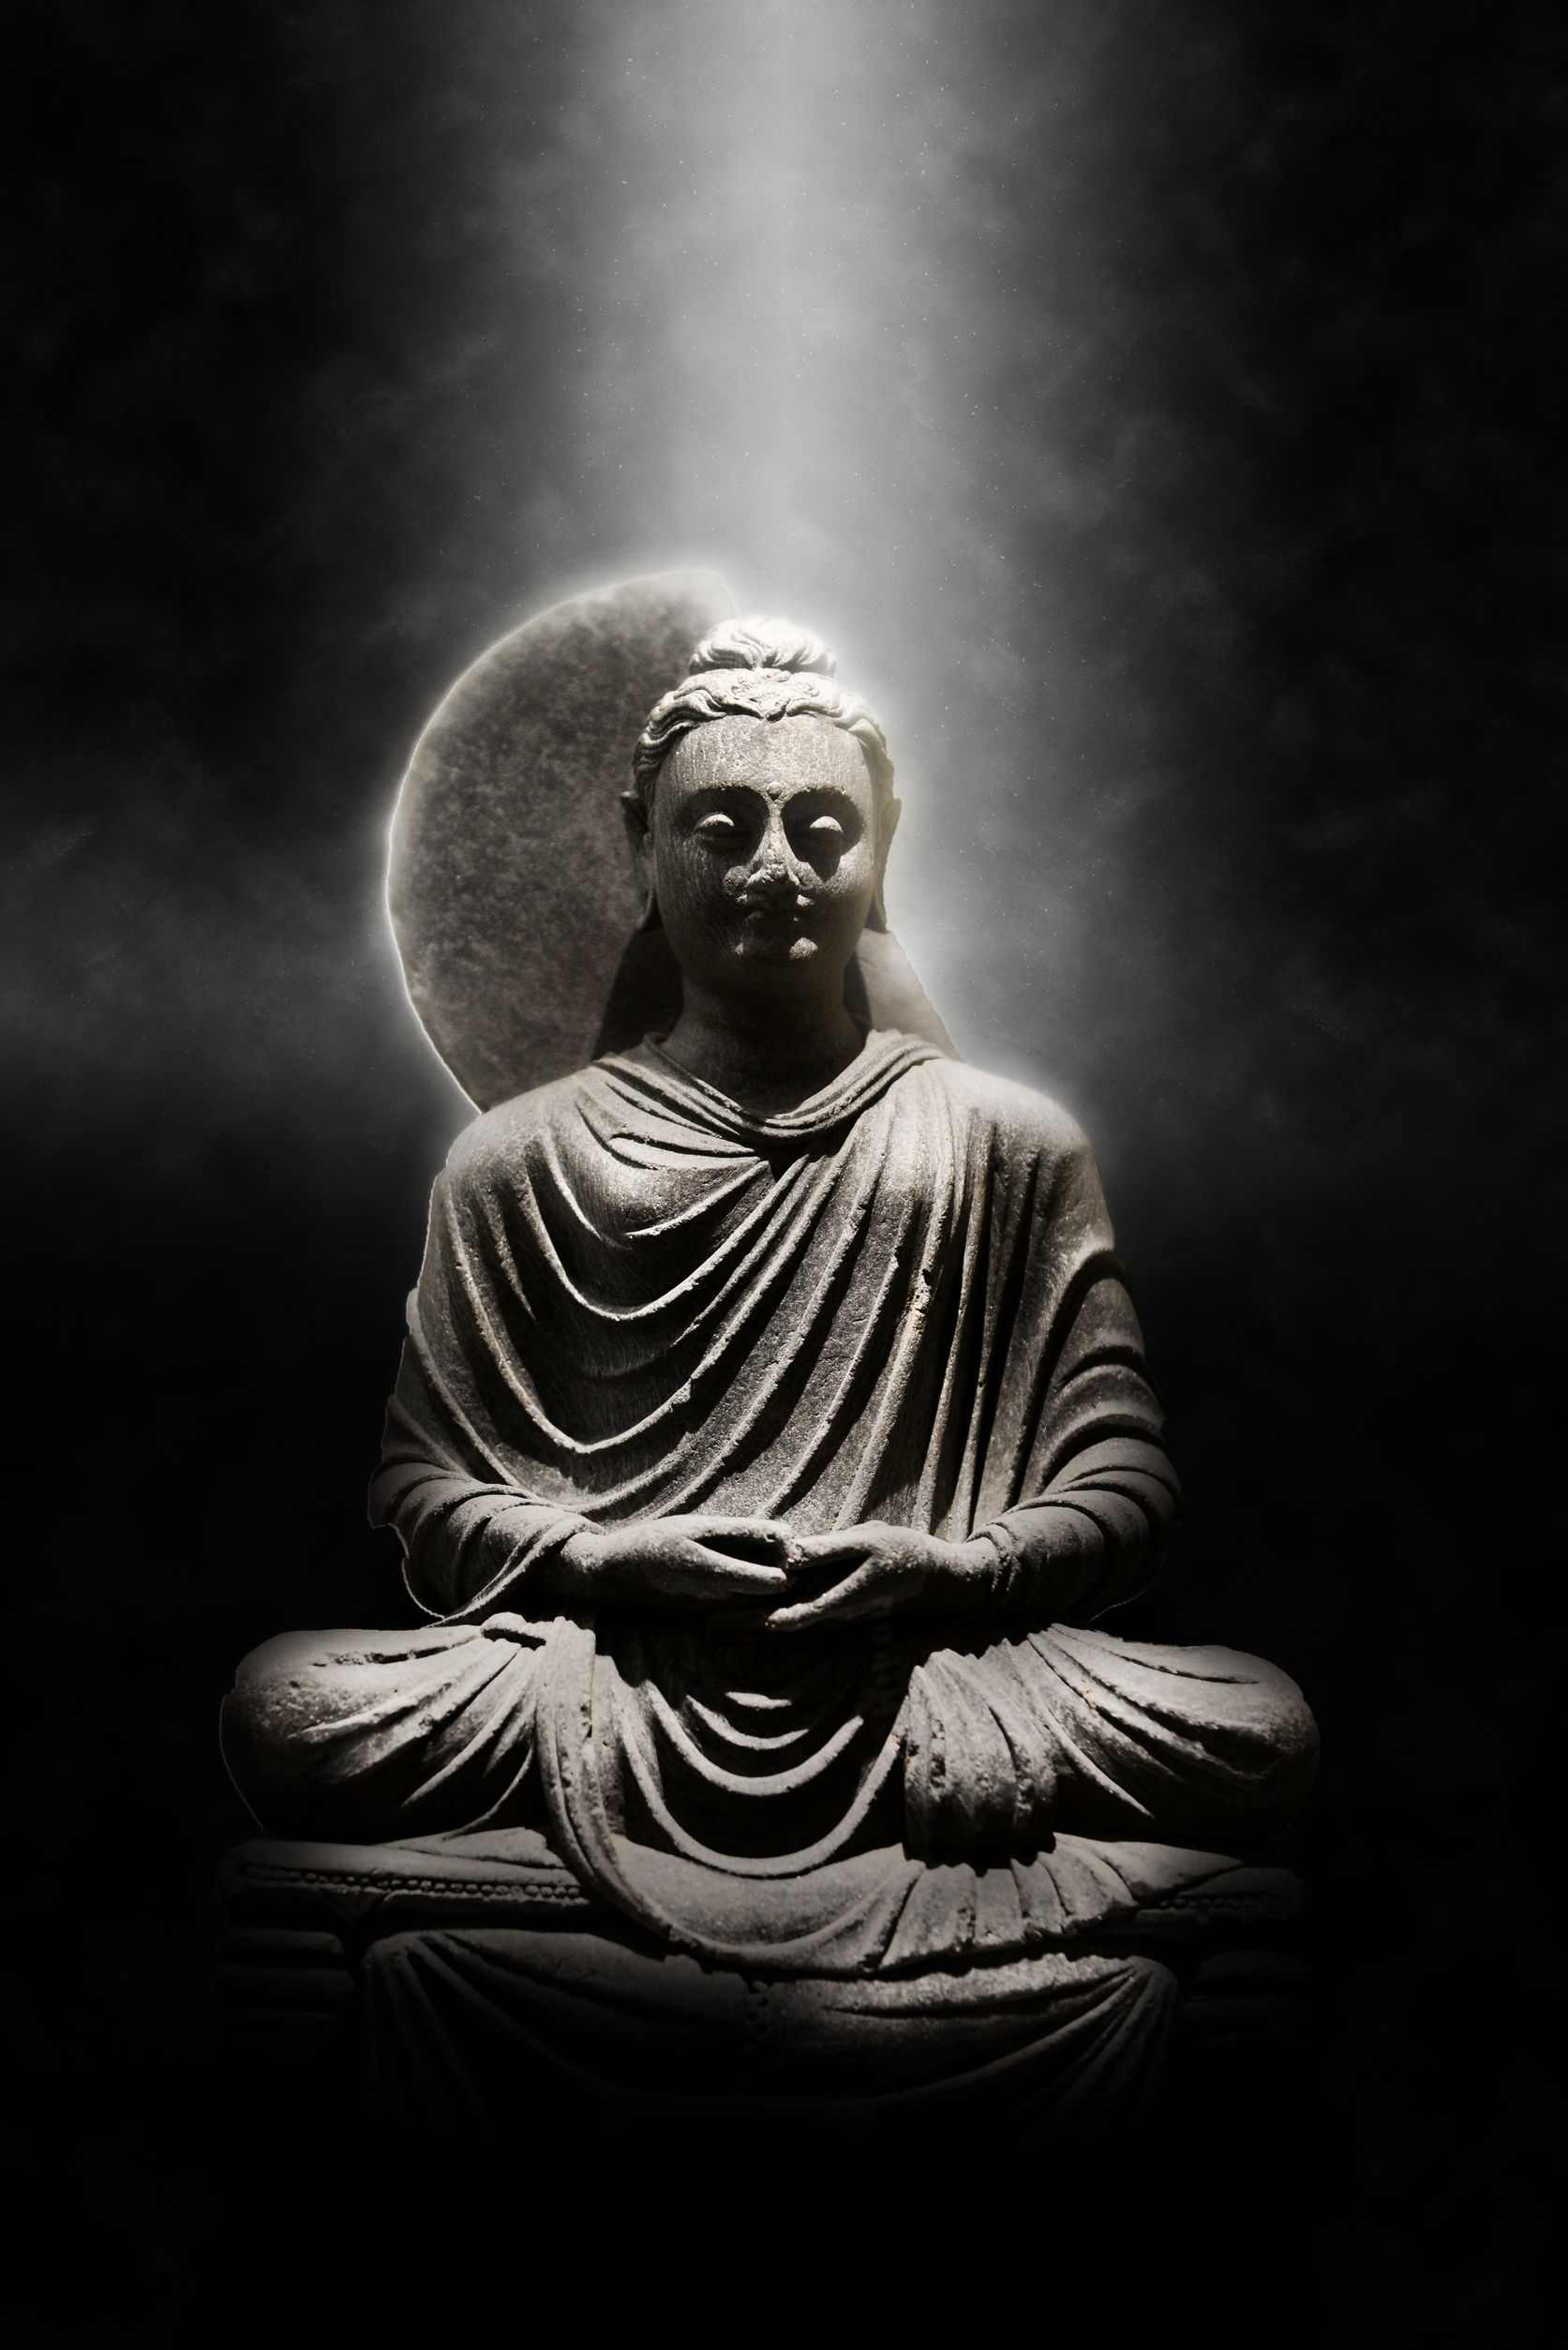 41026822 - full length stone carved seated buddha statue dramatically lit from above on dark background, meditation and spirituality concept still life image